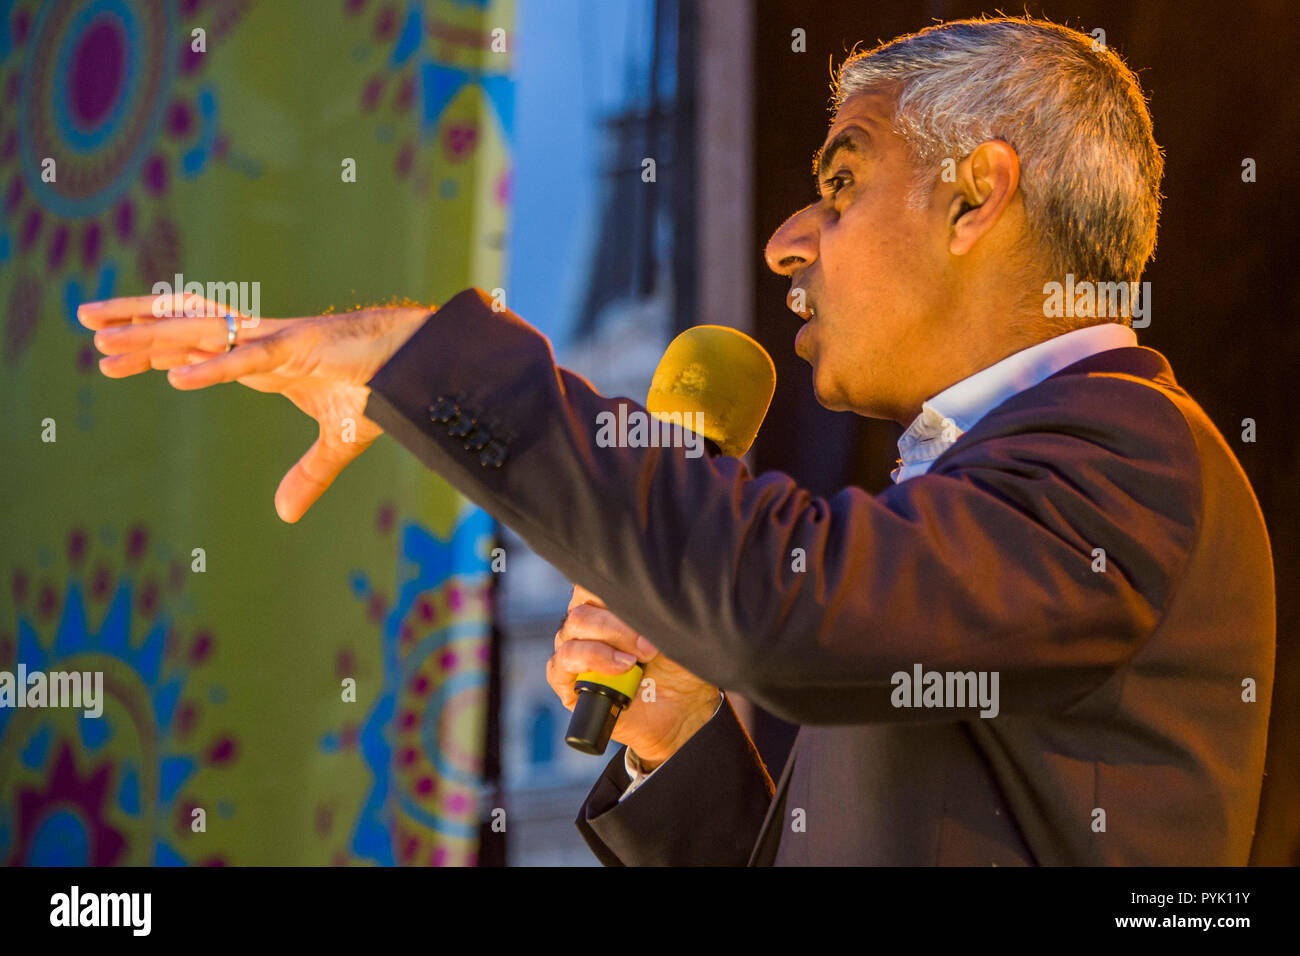 London, UK. 28th Oct, 2018. Sadiq Khan speaks wearing a poppy make of khadi, a material popularised by Mahatma Gandhi, in honour of the 1.5m members of the Indian Expeditionary Force who fought in Europe with the British army during WW1 - Diwali Festival 2018, Trafalgar Square, London - to celebrate the Hindu, Sikh and Jain festival of lights a line-up of music and dance, plus workshops, foods and crafts. Credit: Guy Bell/Alamy Live News Stock Photo